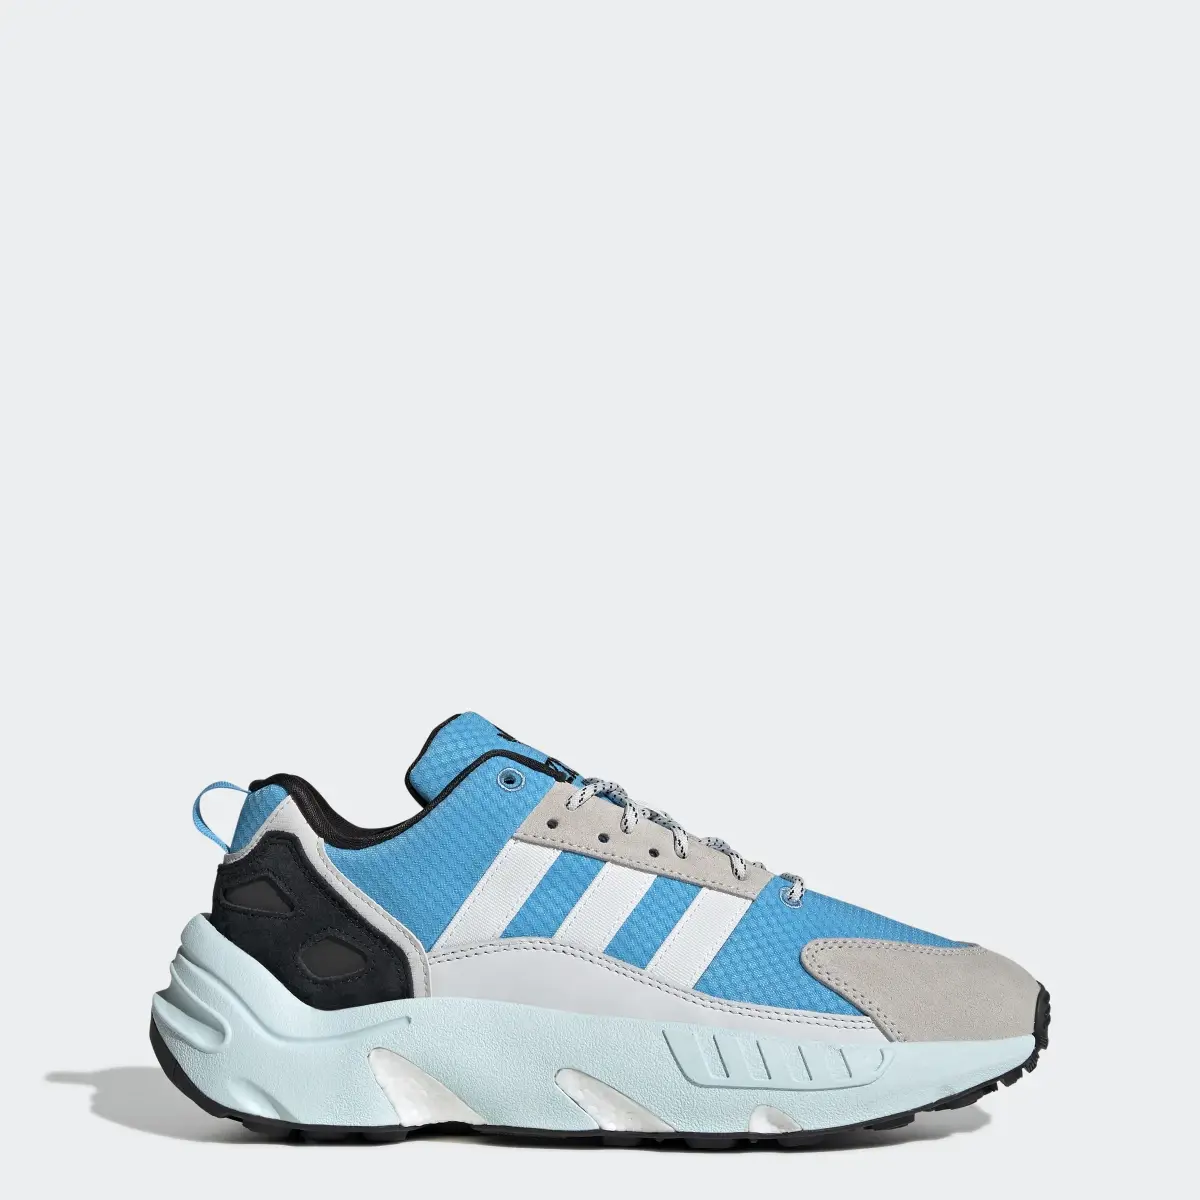 Adidas ZX 22 BOOST Shoes. 1